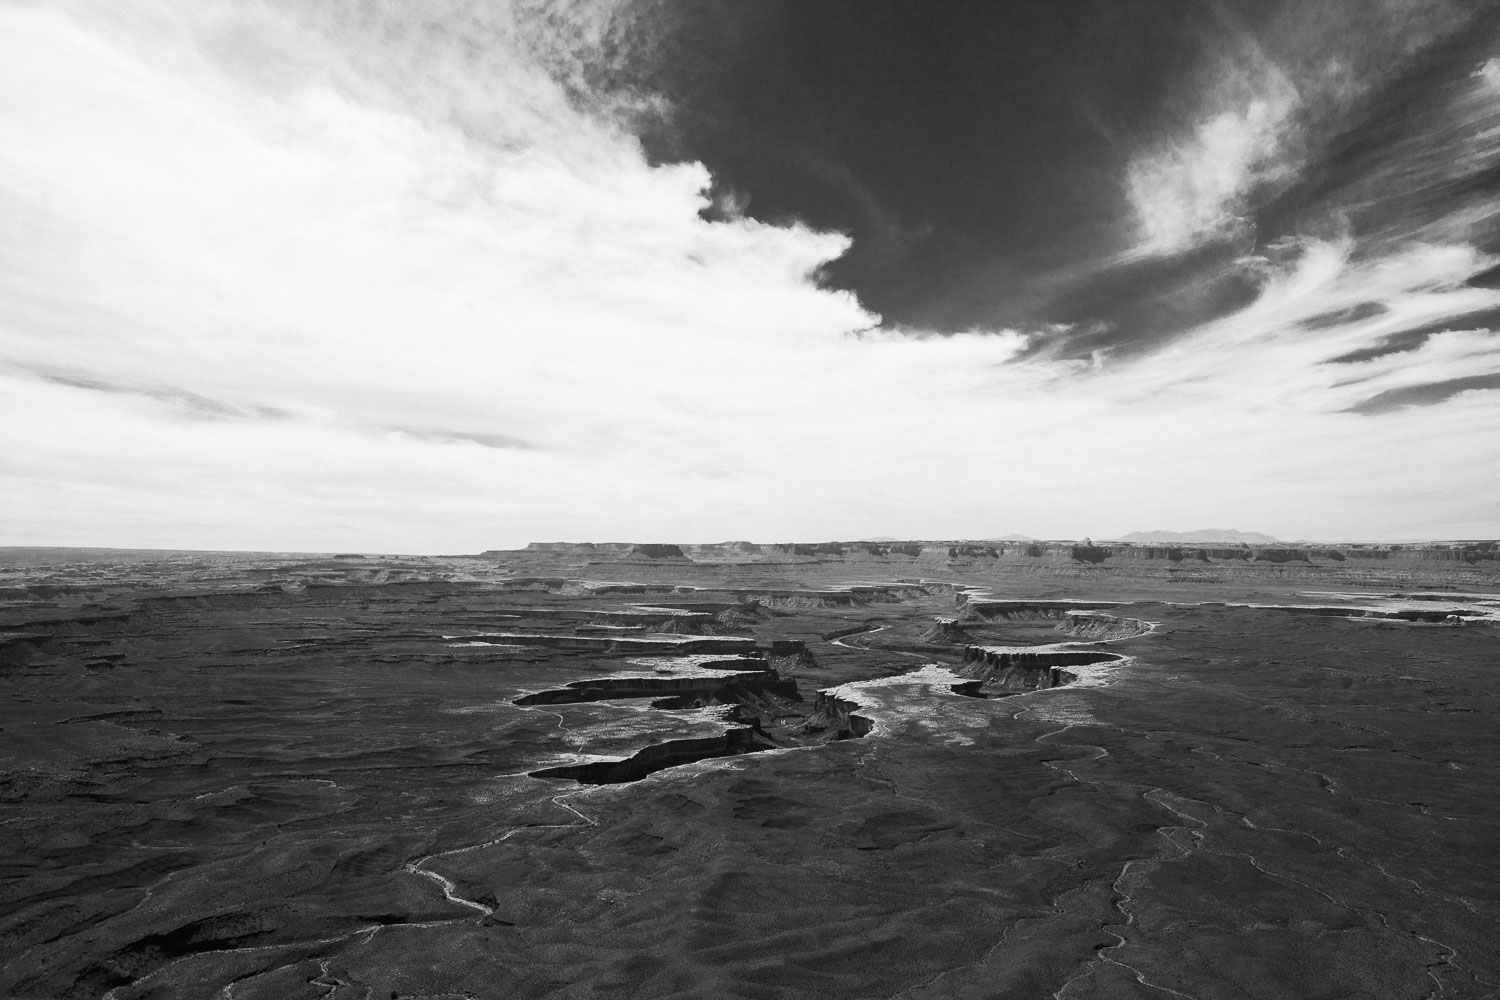 Canyonlands in black & white